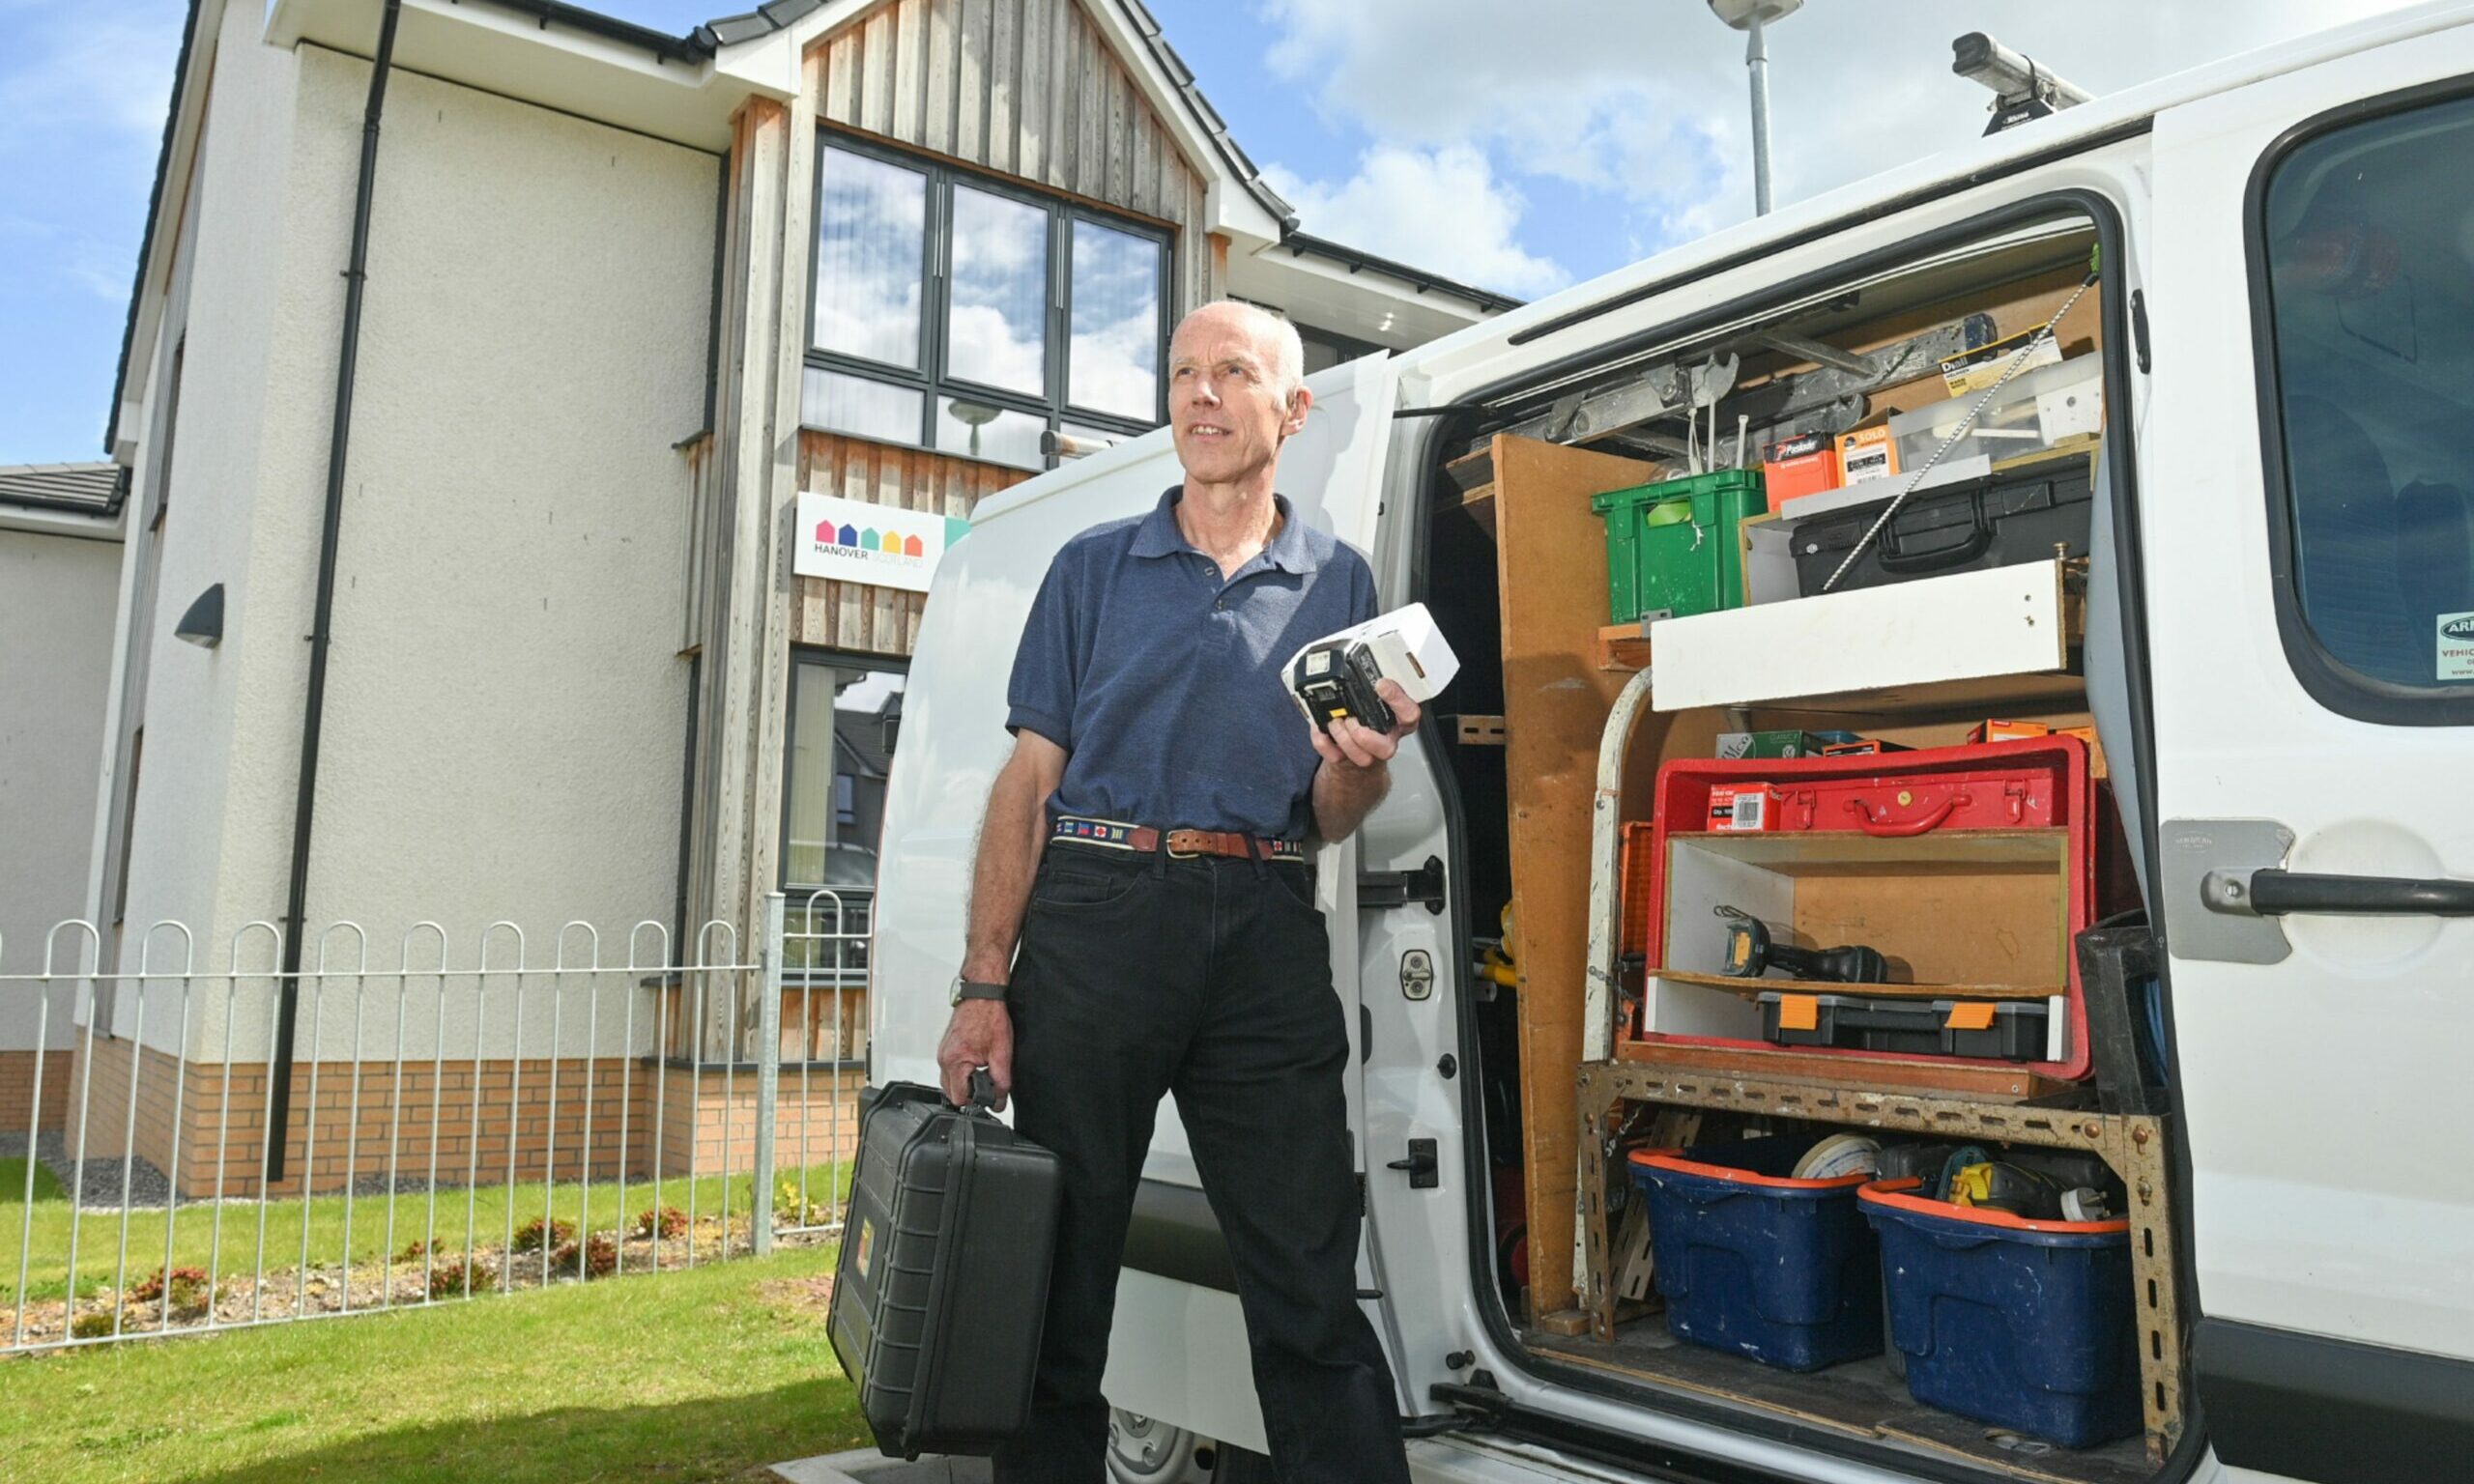 Moray Handyperson Service faces lack of funding and volunteers